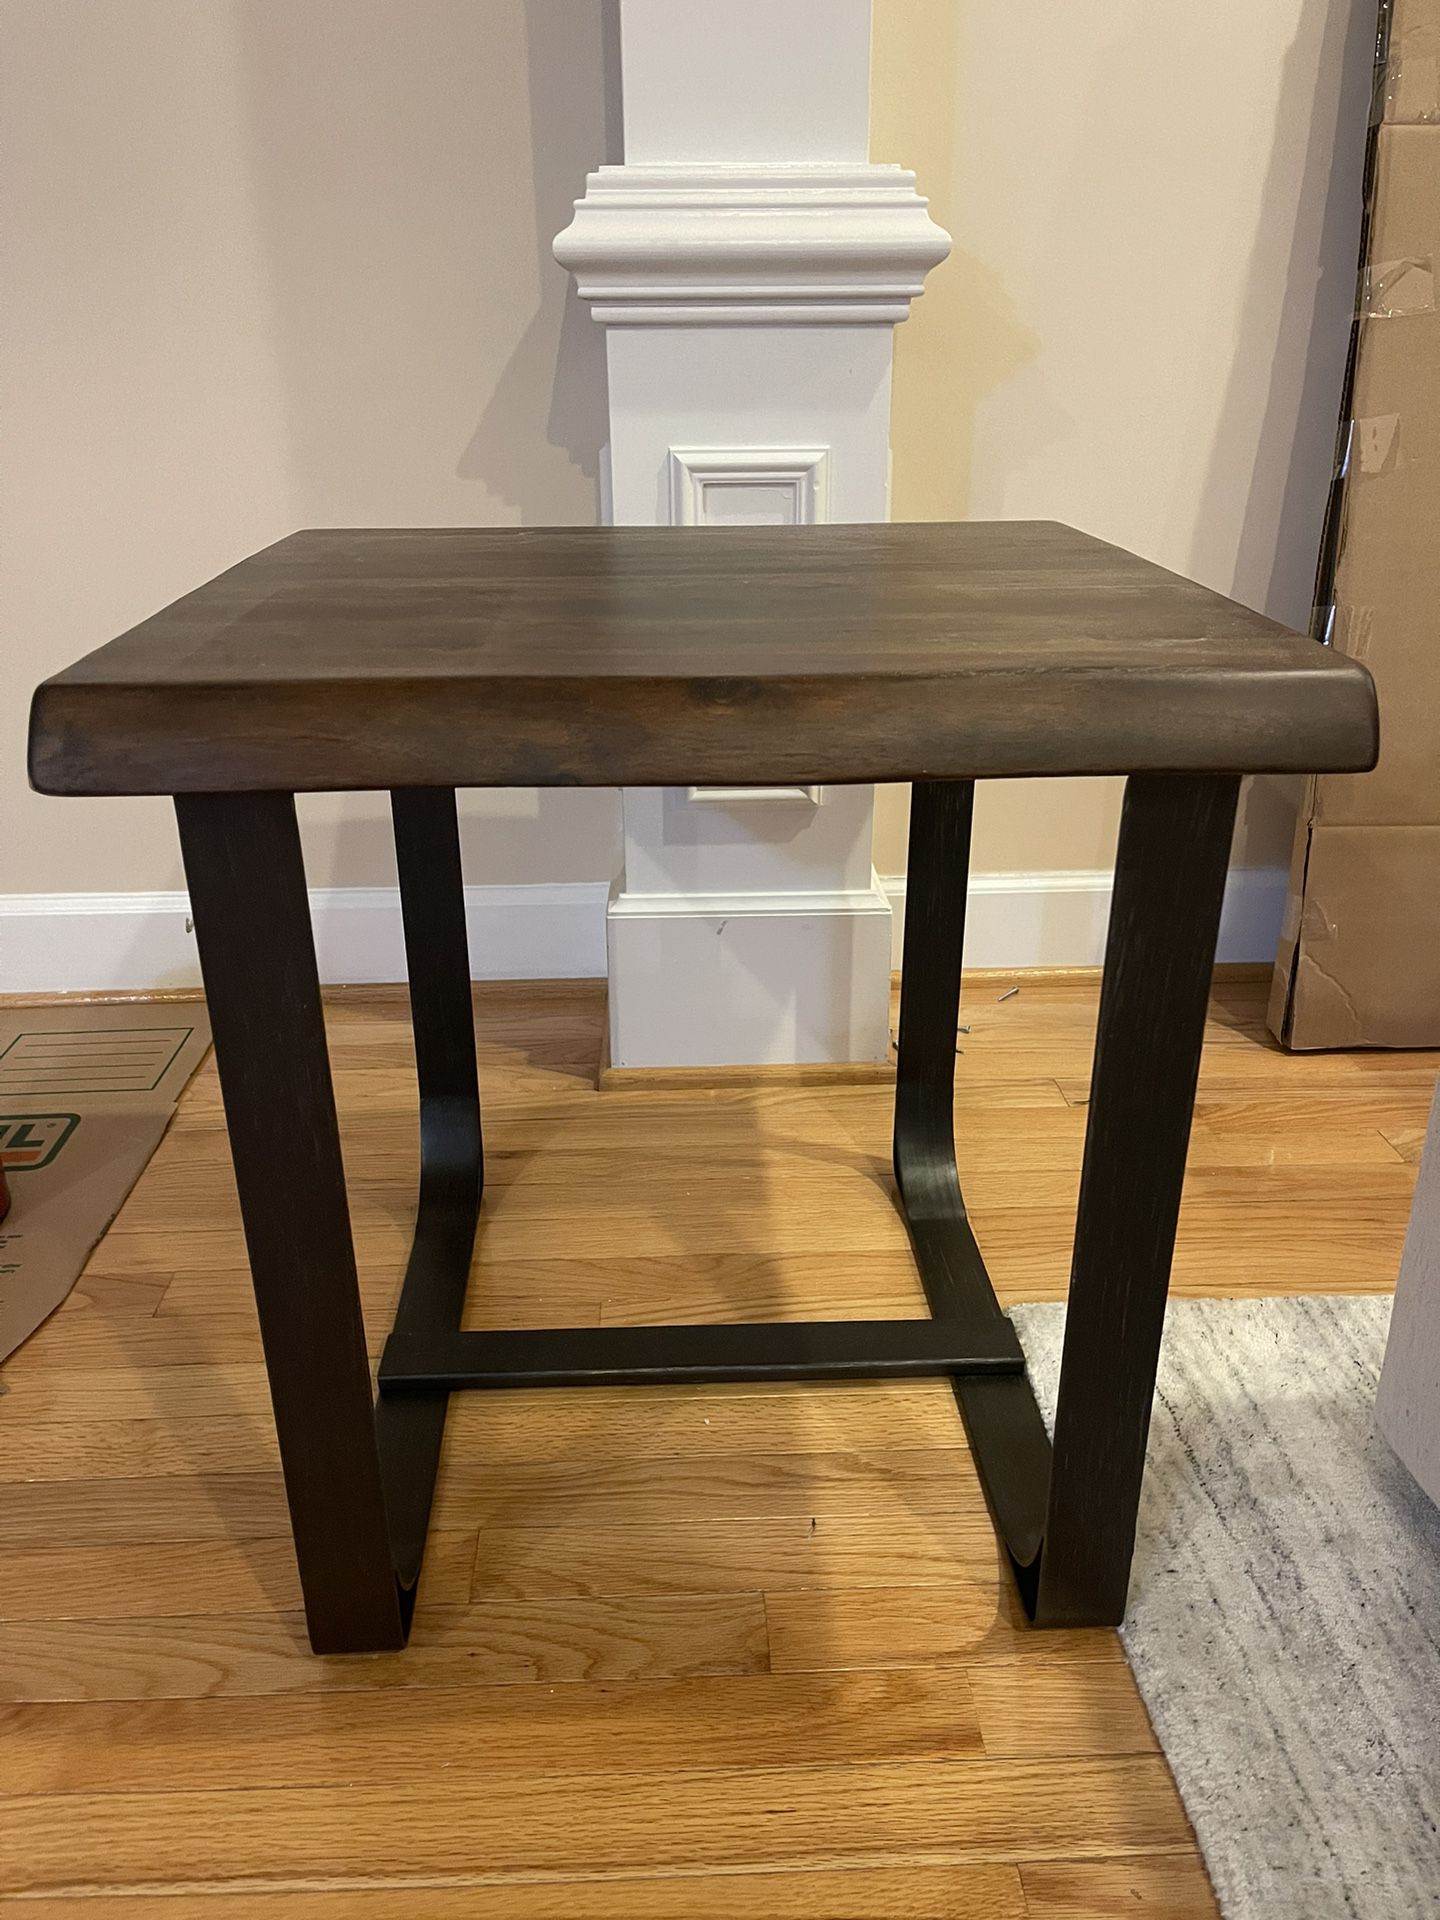 Side Table For Sale 